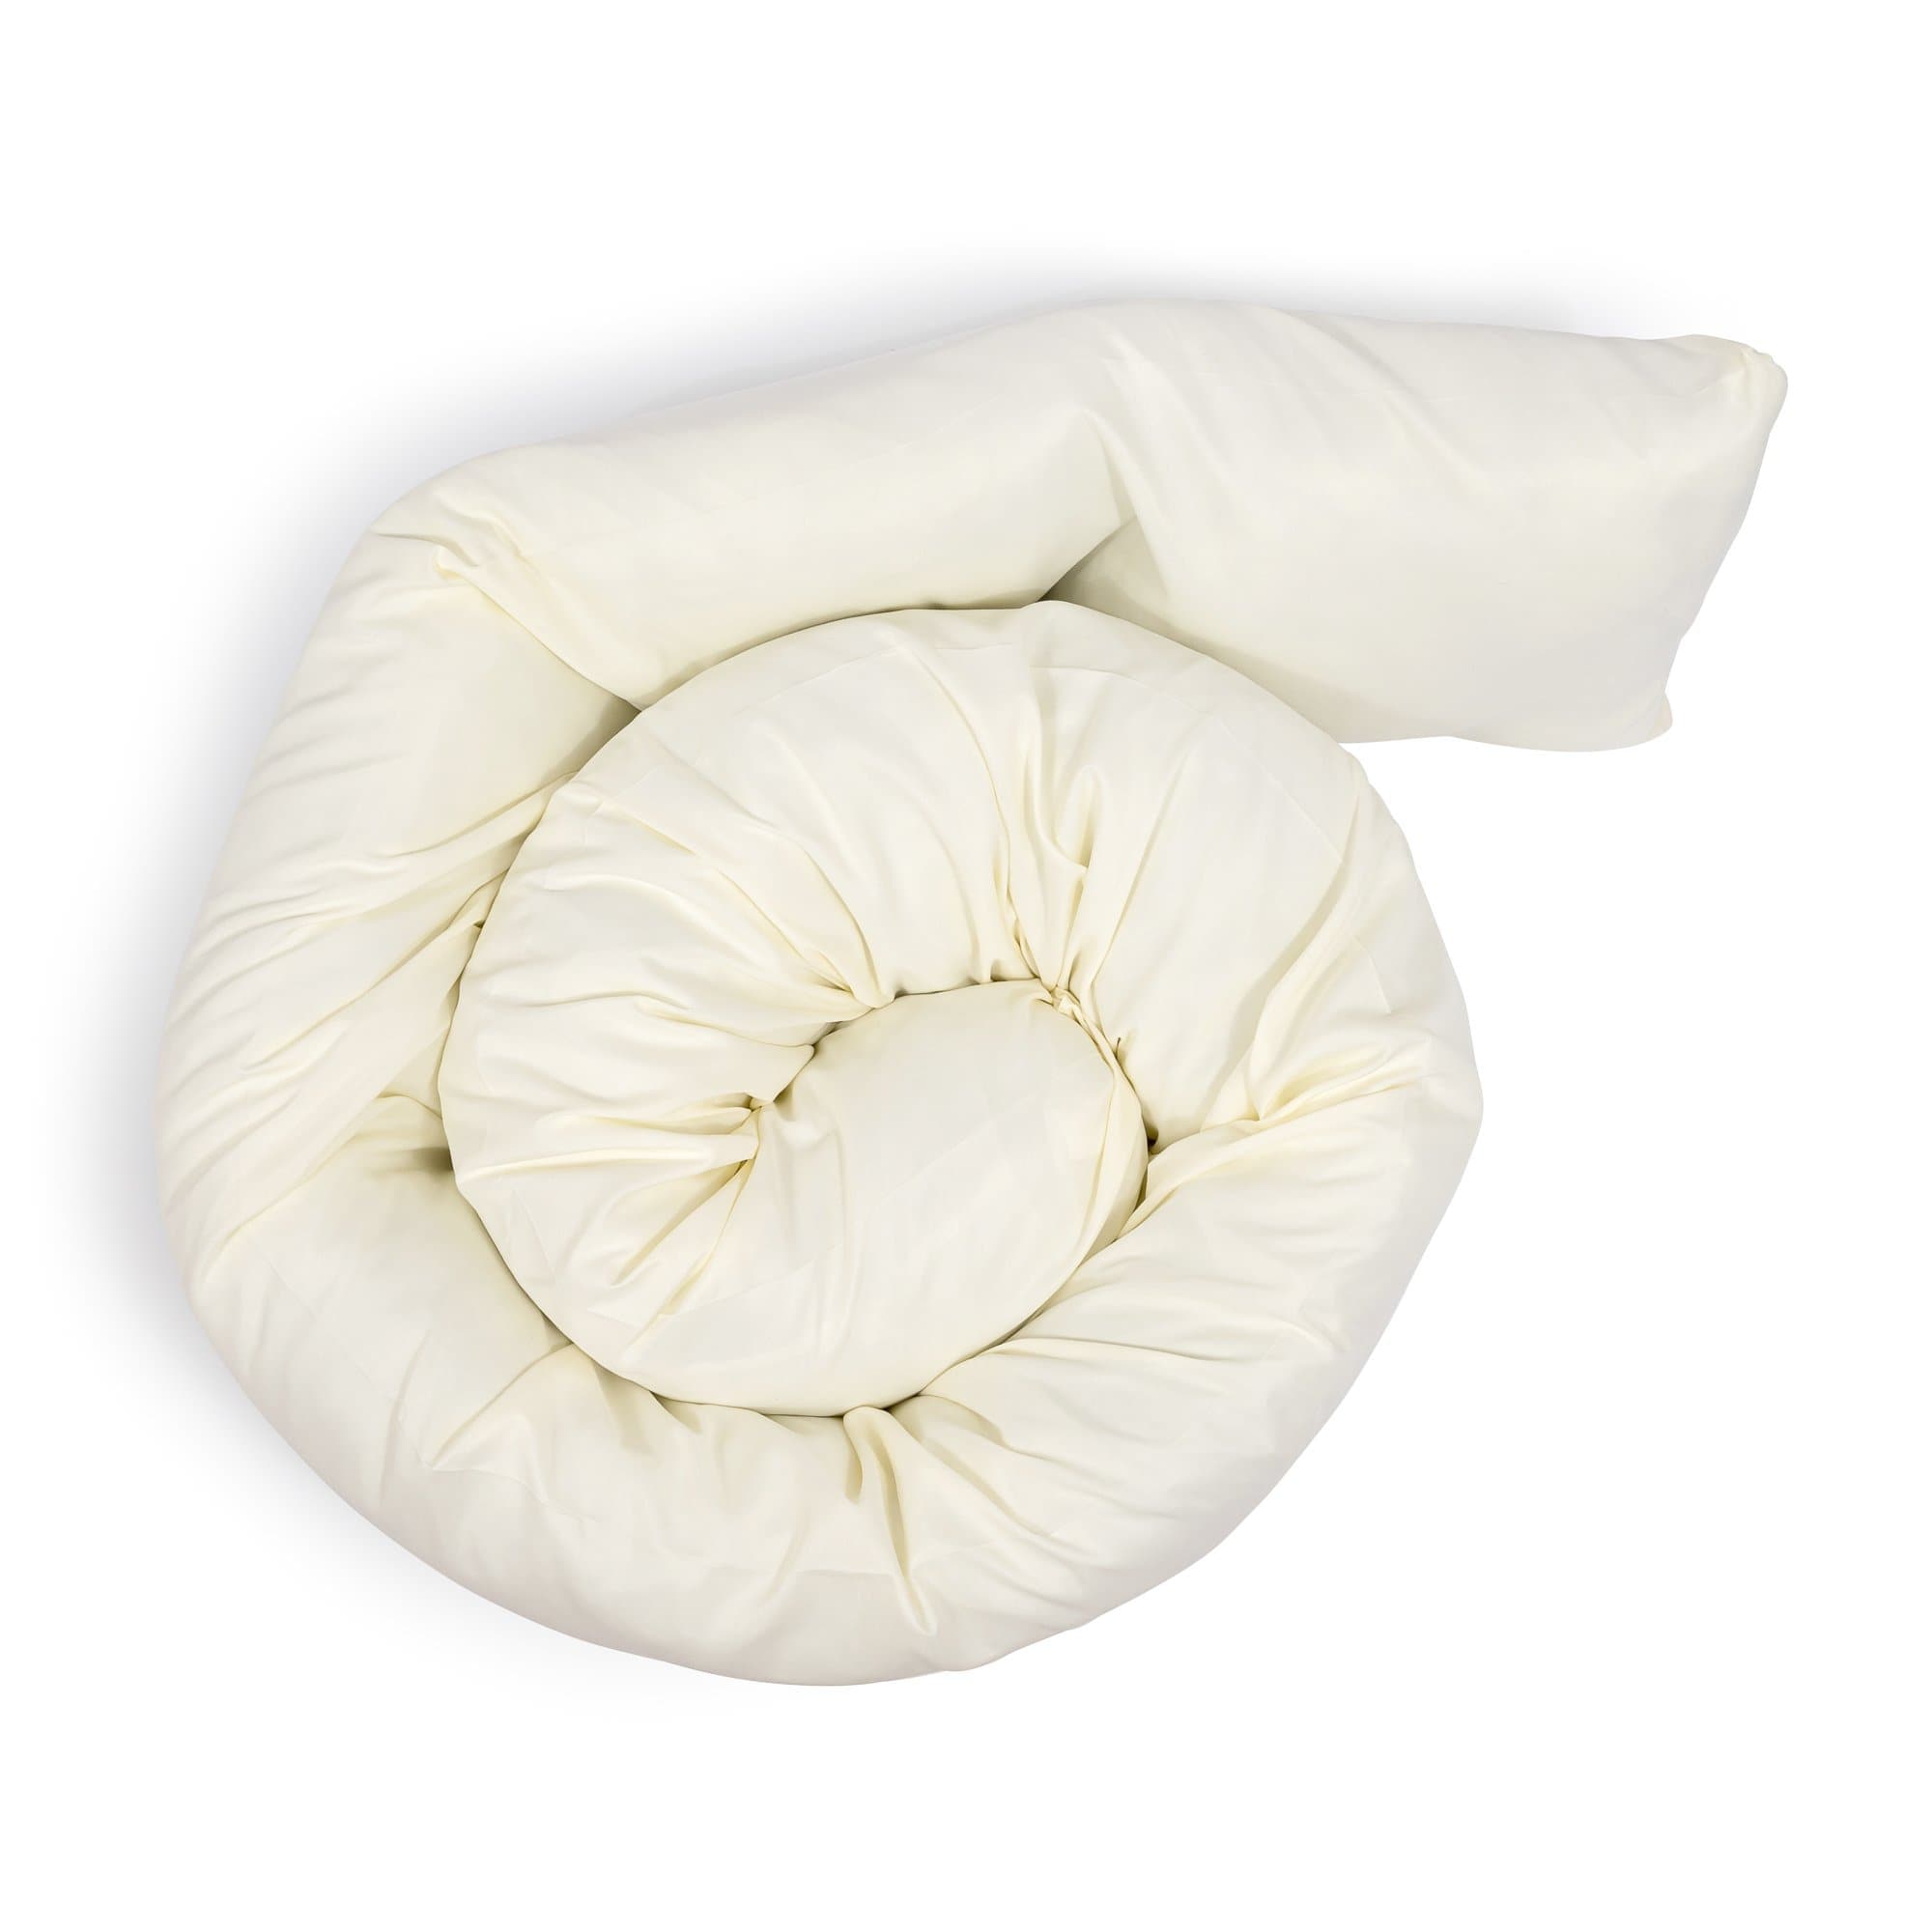 6 Ft Maternity Pillow And Case - Cream - For Your Little One